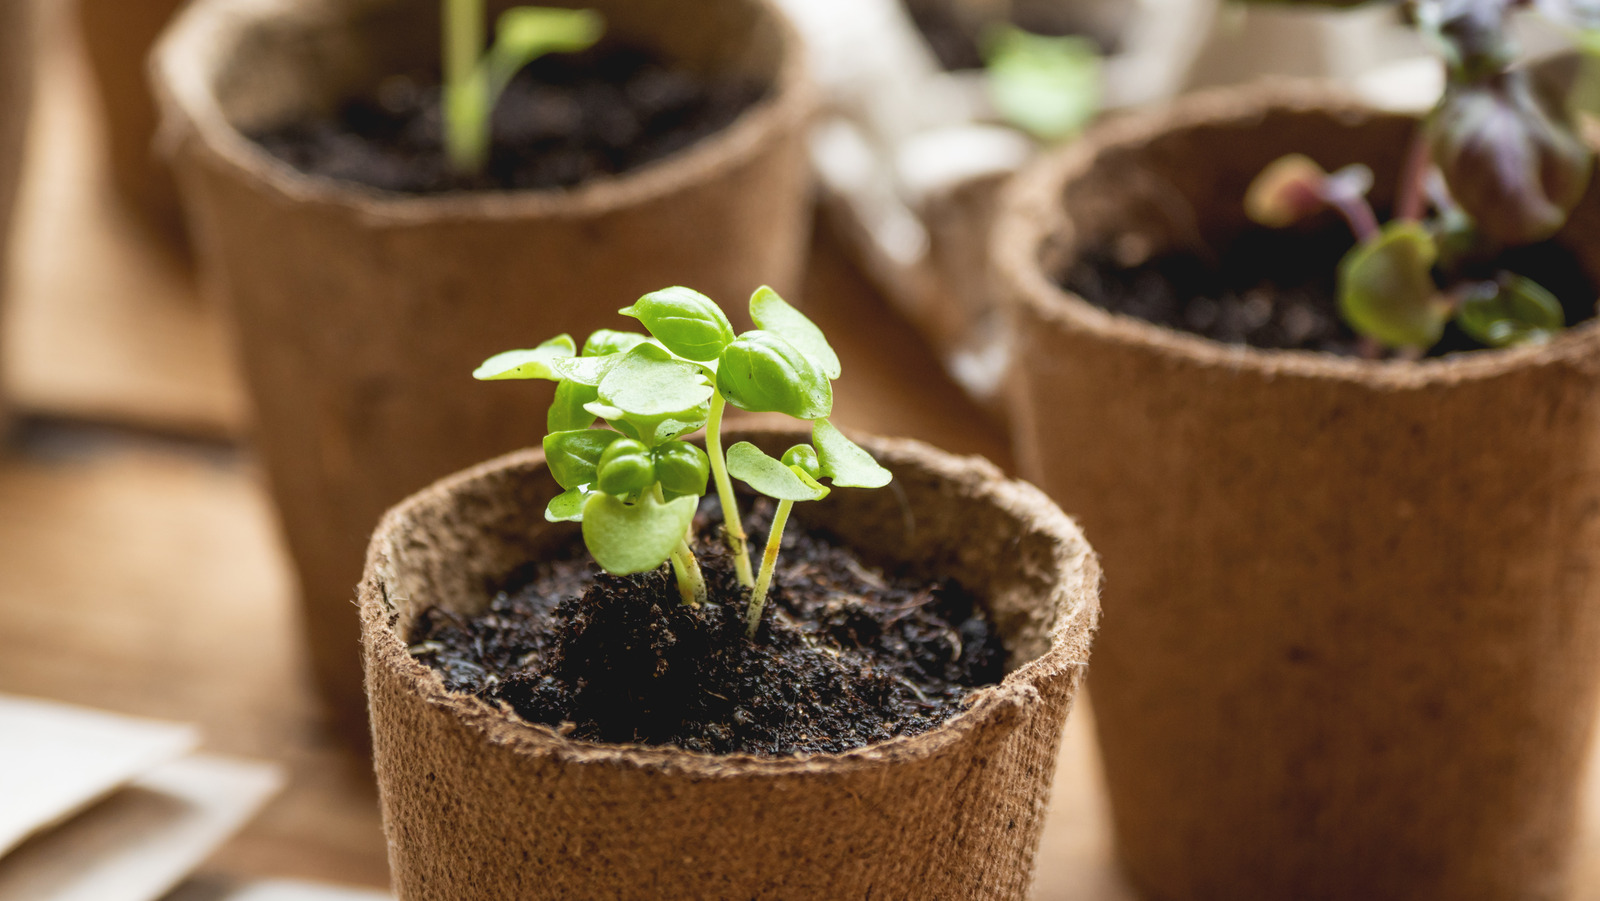 https://www.housedigest.com/img/gallery/should-you-switch-to-biodegradable-plant-pots-theres-more-to-it-than-just-the-obvious-benefit/l-intro-1686078996.jpg